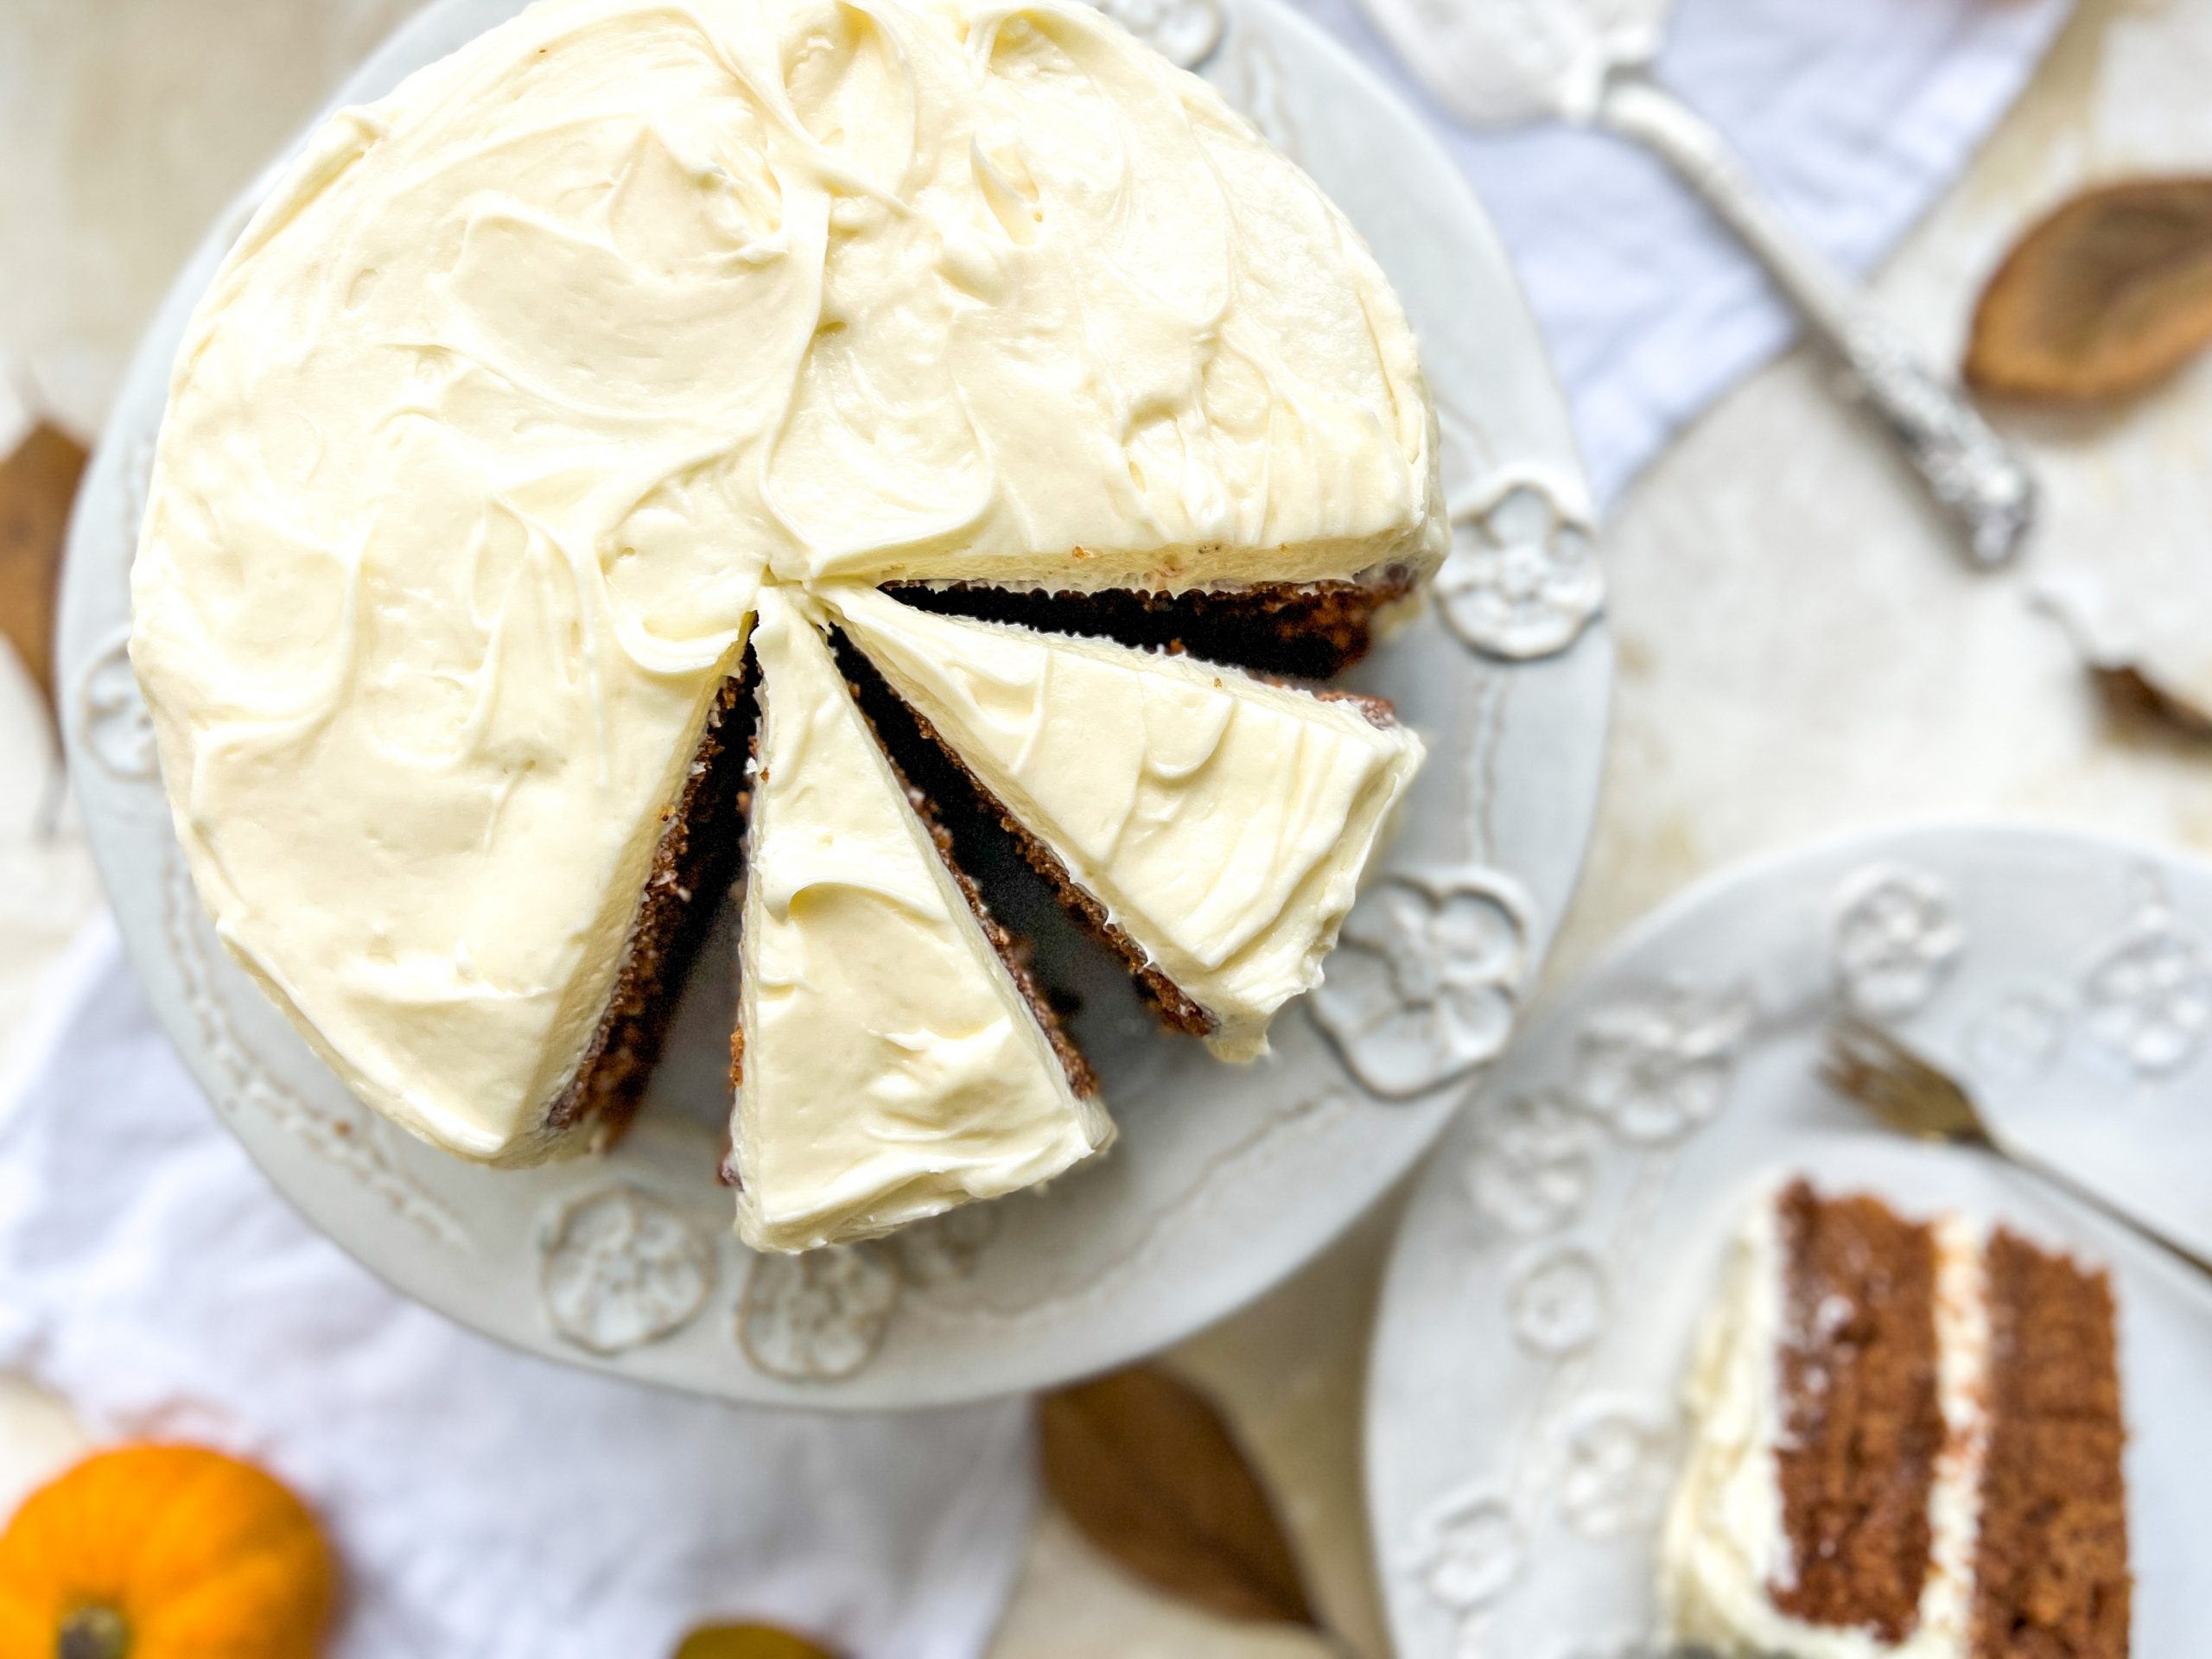 Photograph of Spiced Pumpkin Cake with Cream Cheese Frosting